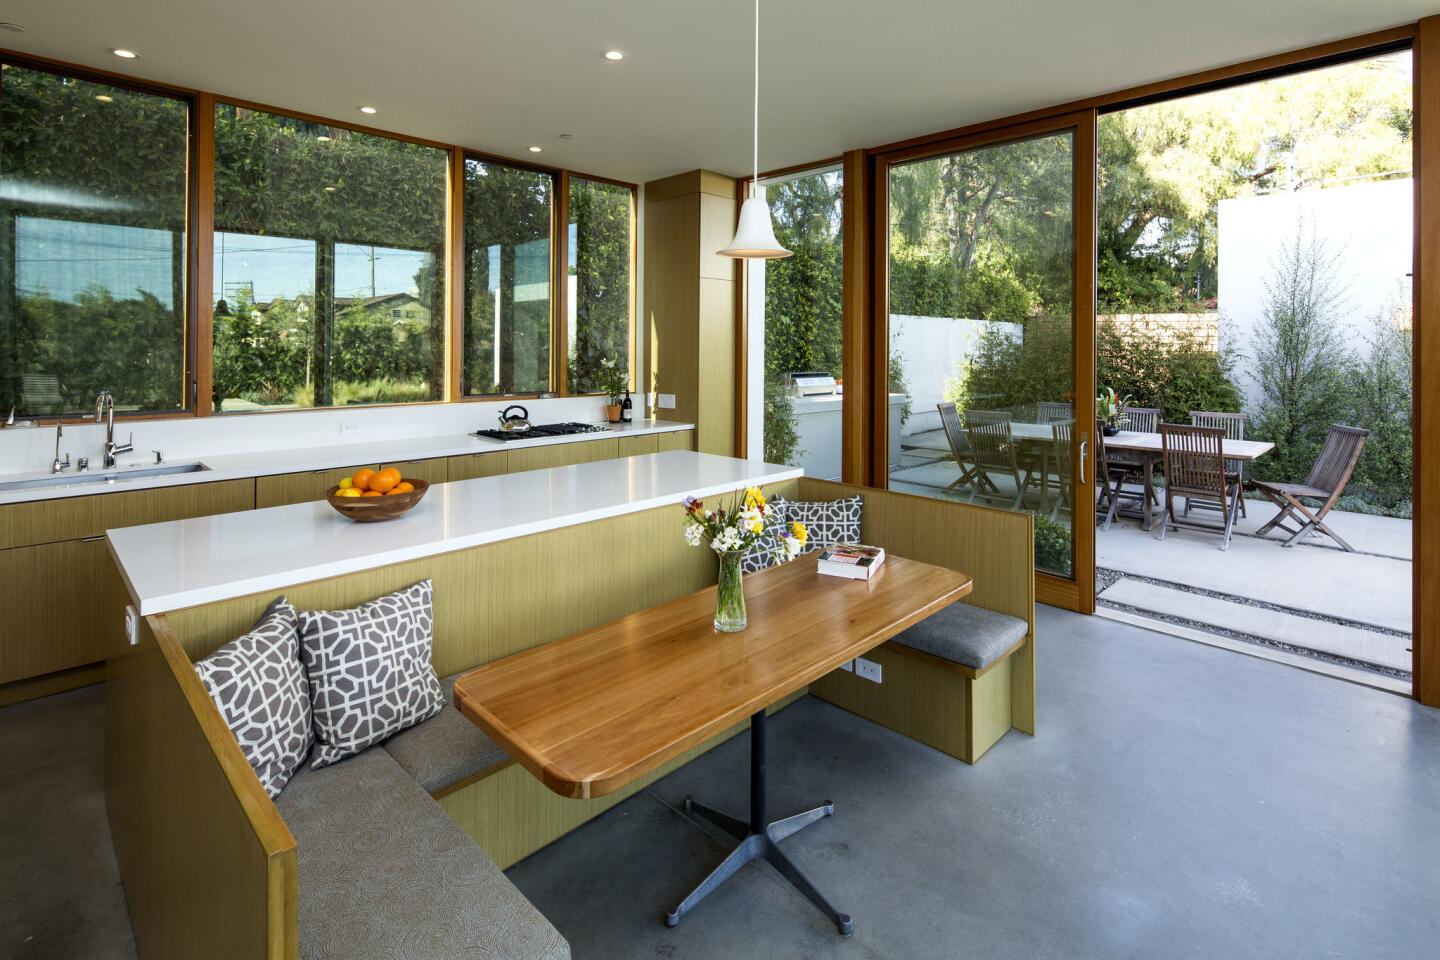 Entertaining will continue to result in more outdoor kitchens.